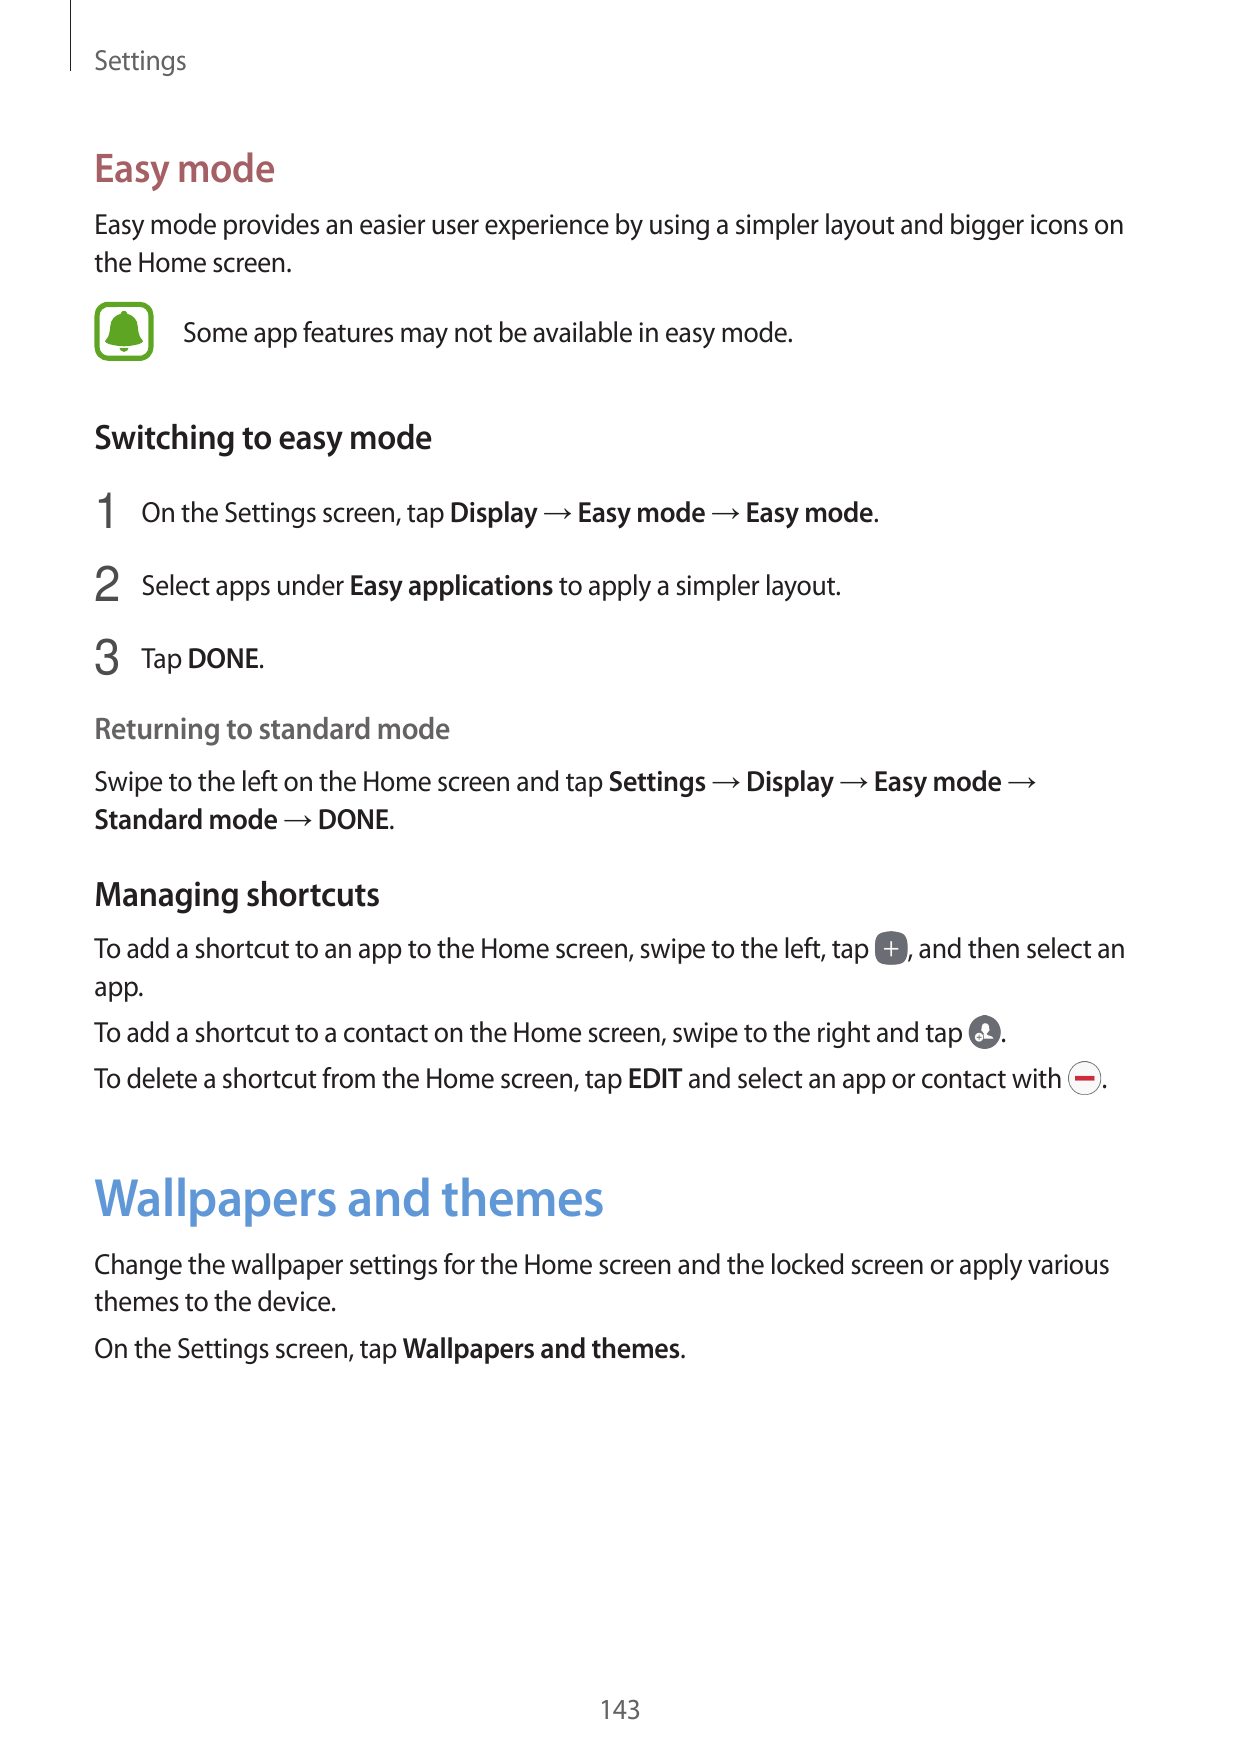 SettingsEasy modeEasy mode provides an easier user experience by using a simpler layout and bigger icons onthe Home screen.Some 